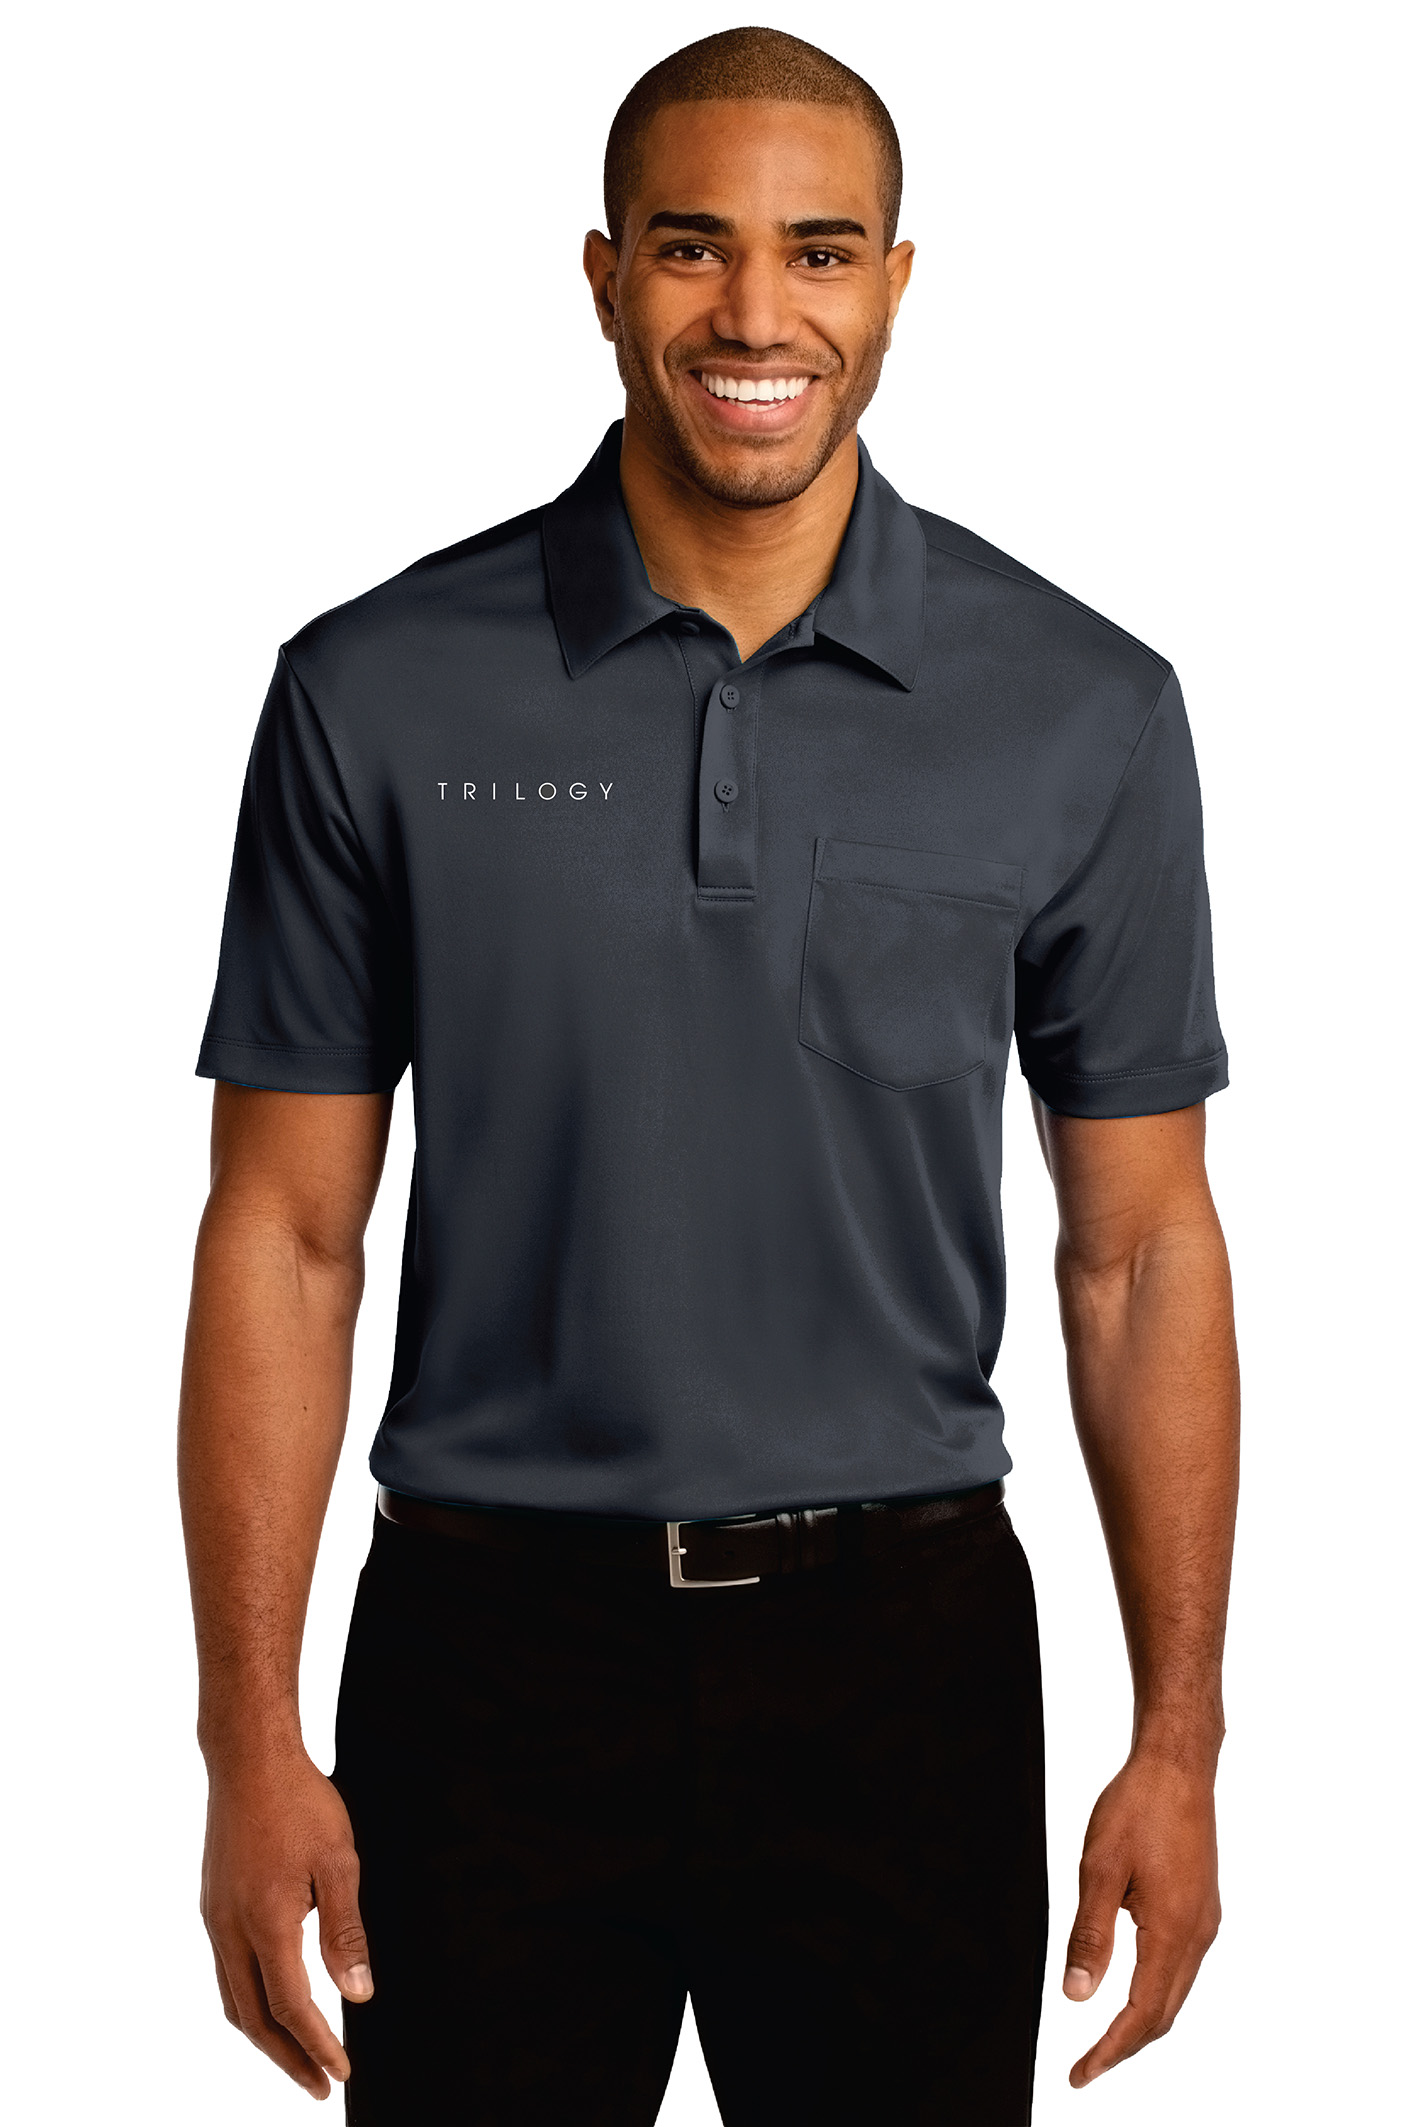 Men's Performance Polo Shirt with Pocket | Trilogy